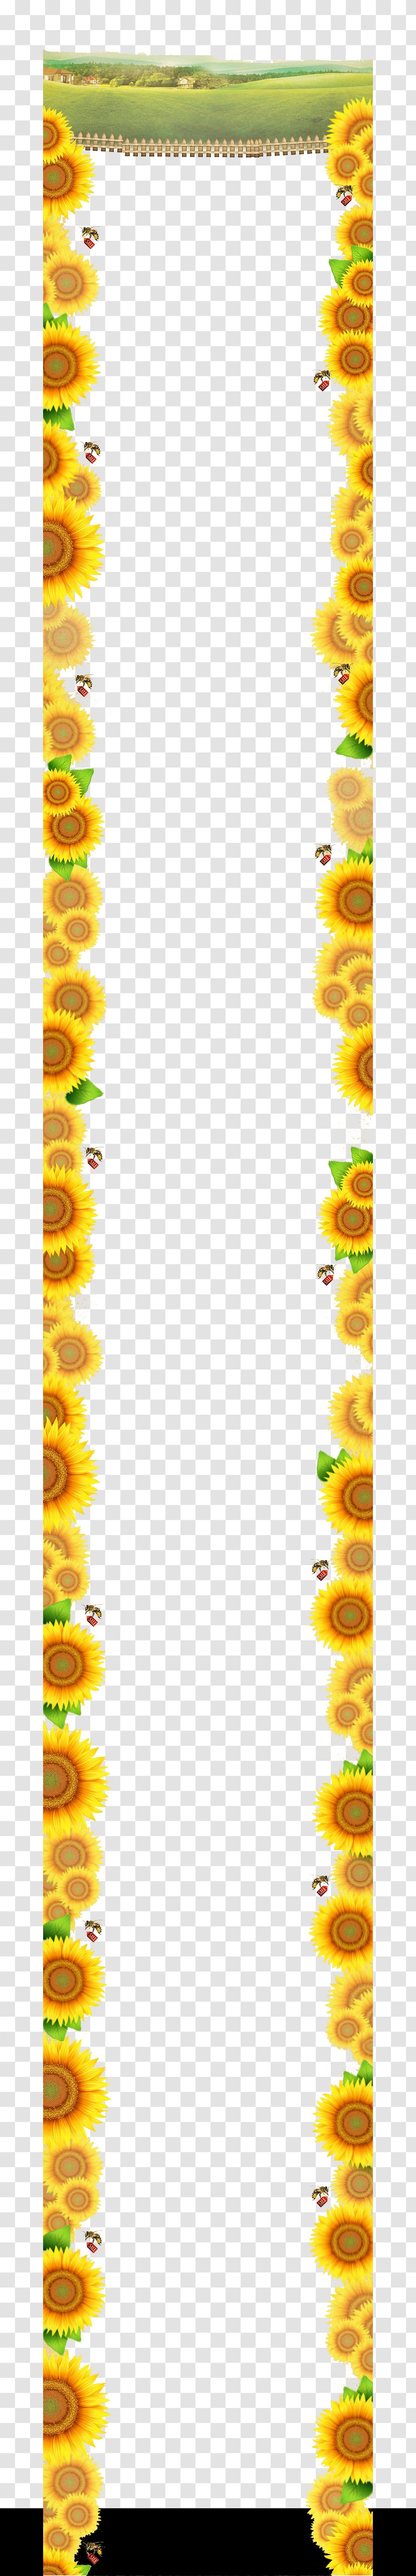 Yellow Area Angle Pattern - Symmetry - Sunflower Border Transparent PNG